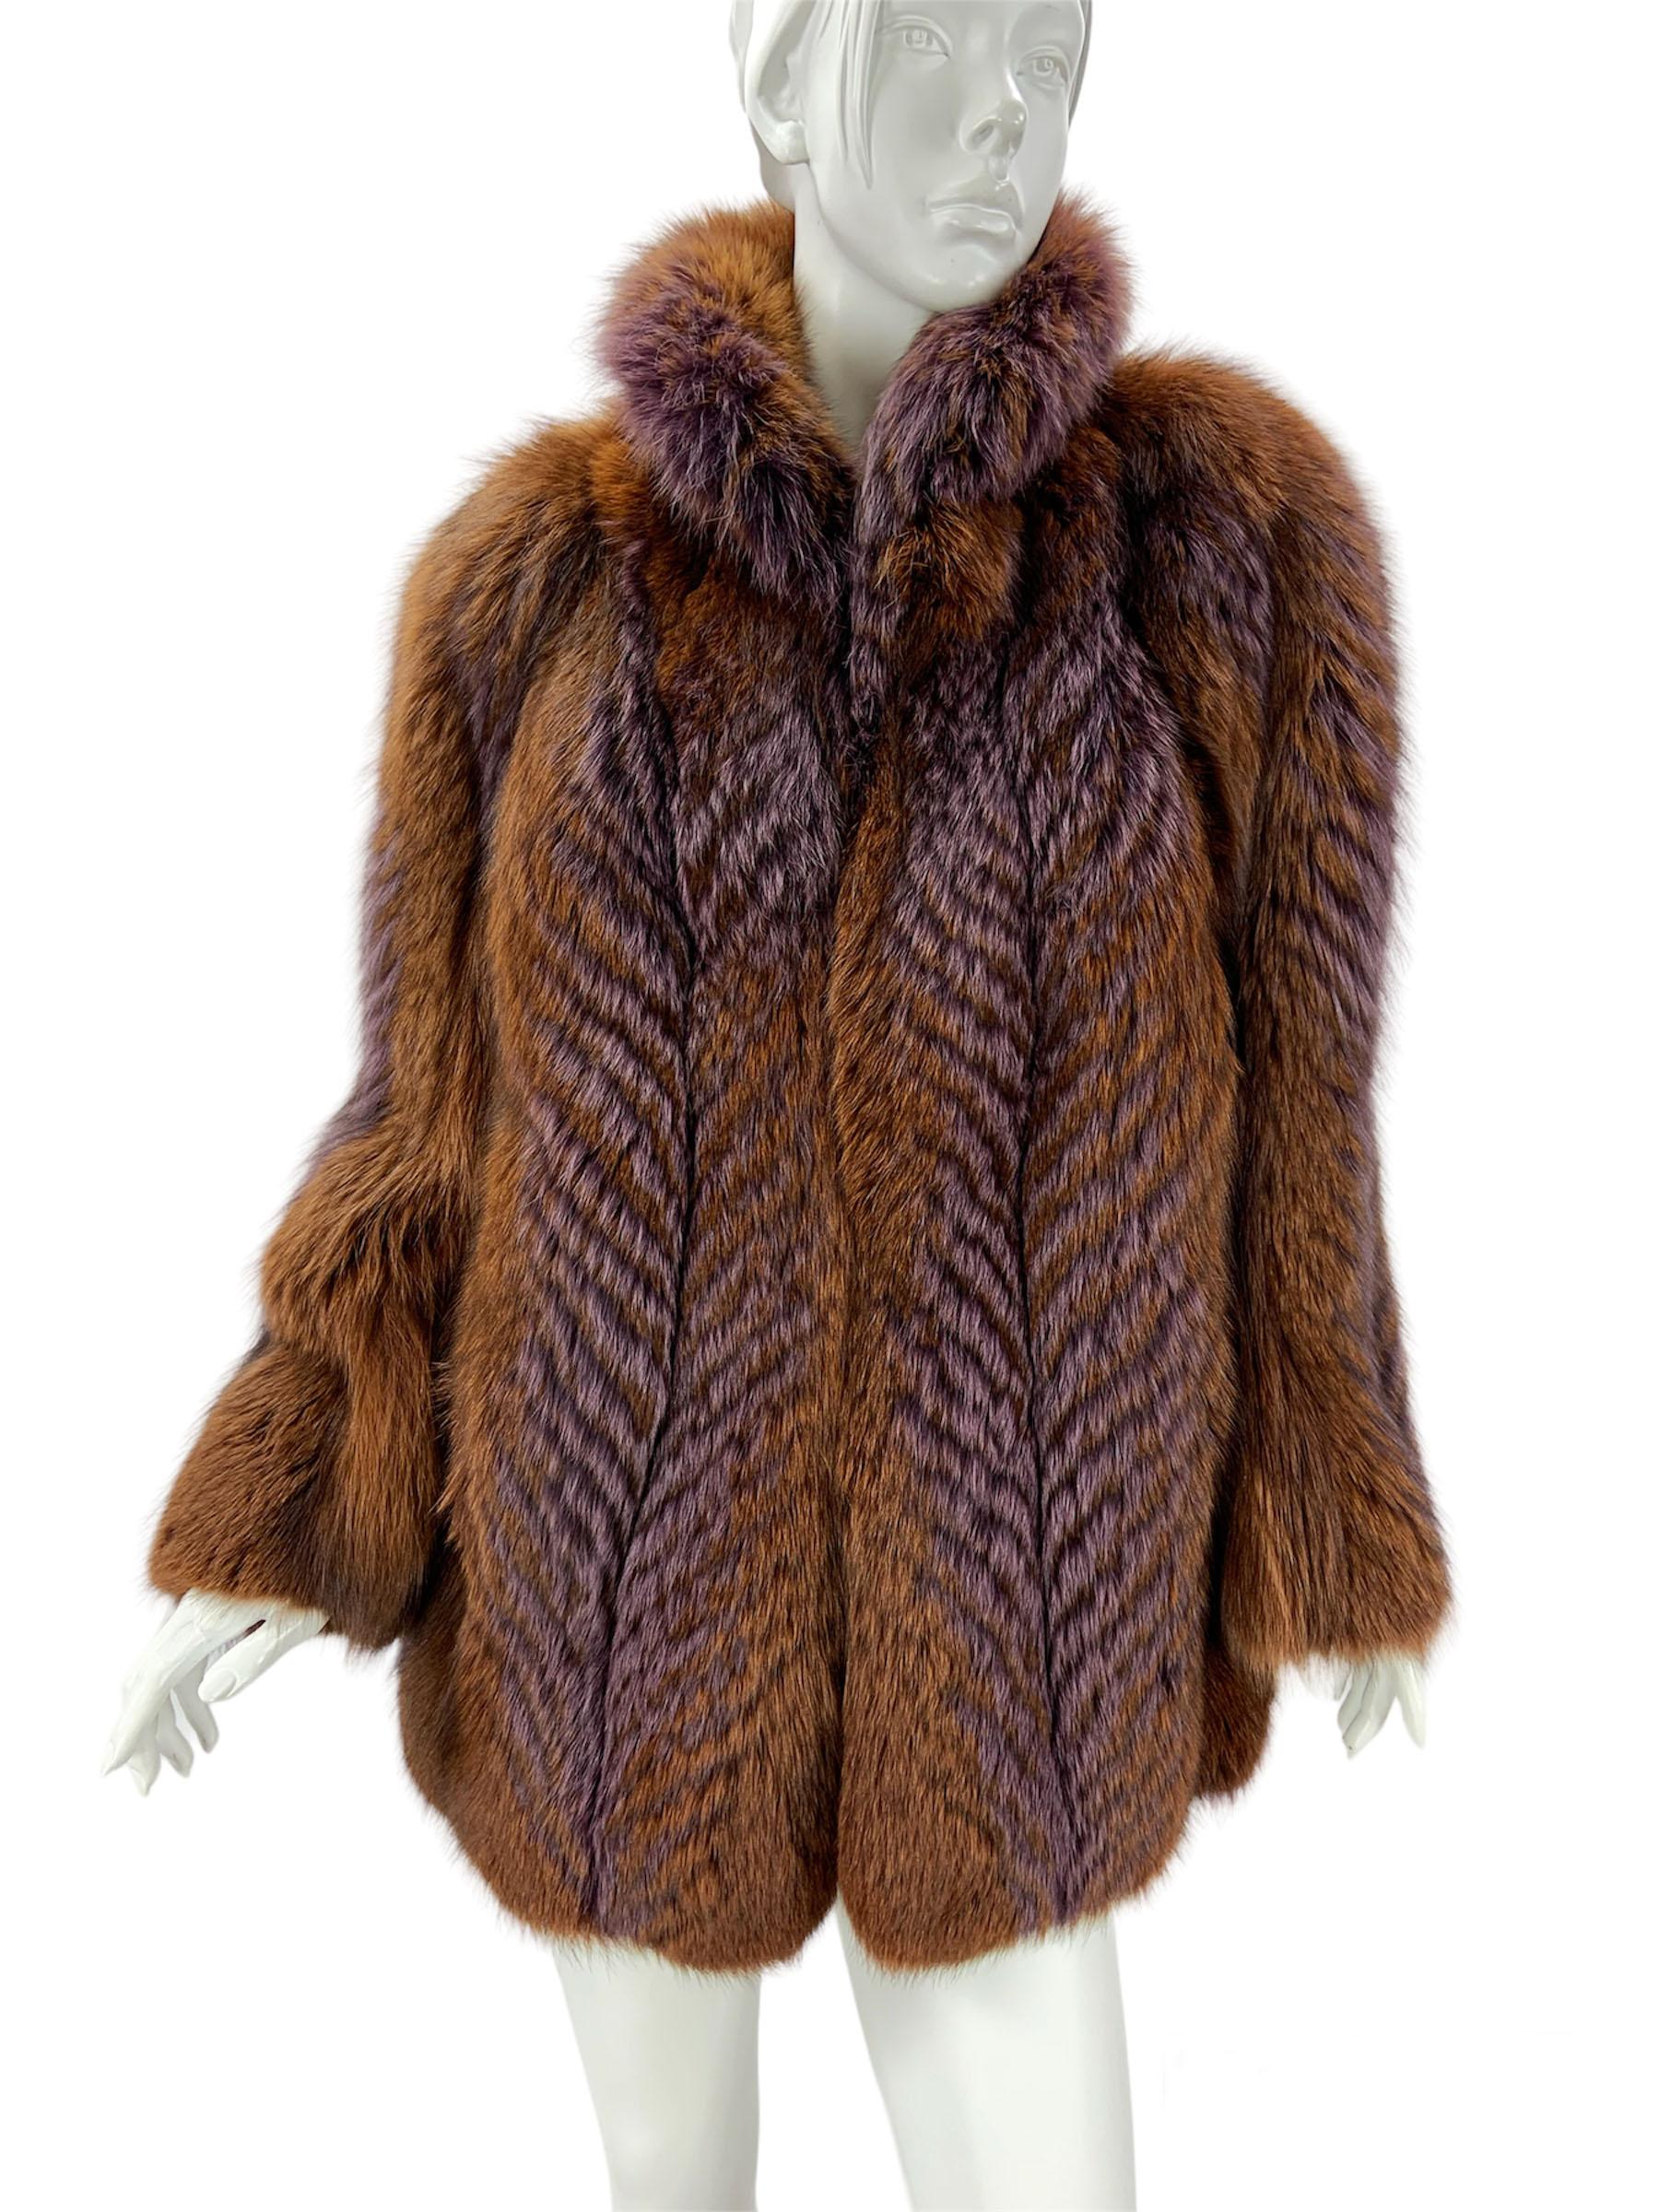 Oscar de la Renta Fox Fur Feather Print Jacket Coat 
Size approx. - L
Brown color with purple feather print, Side pockets with black velvet lining, Hook and eye closure.
Fully lined with embroidery monogram ( Lucy Blakley ).
Measurements: Length -